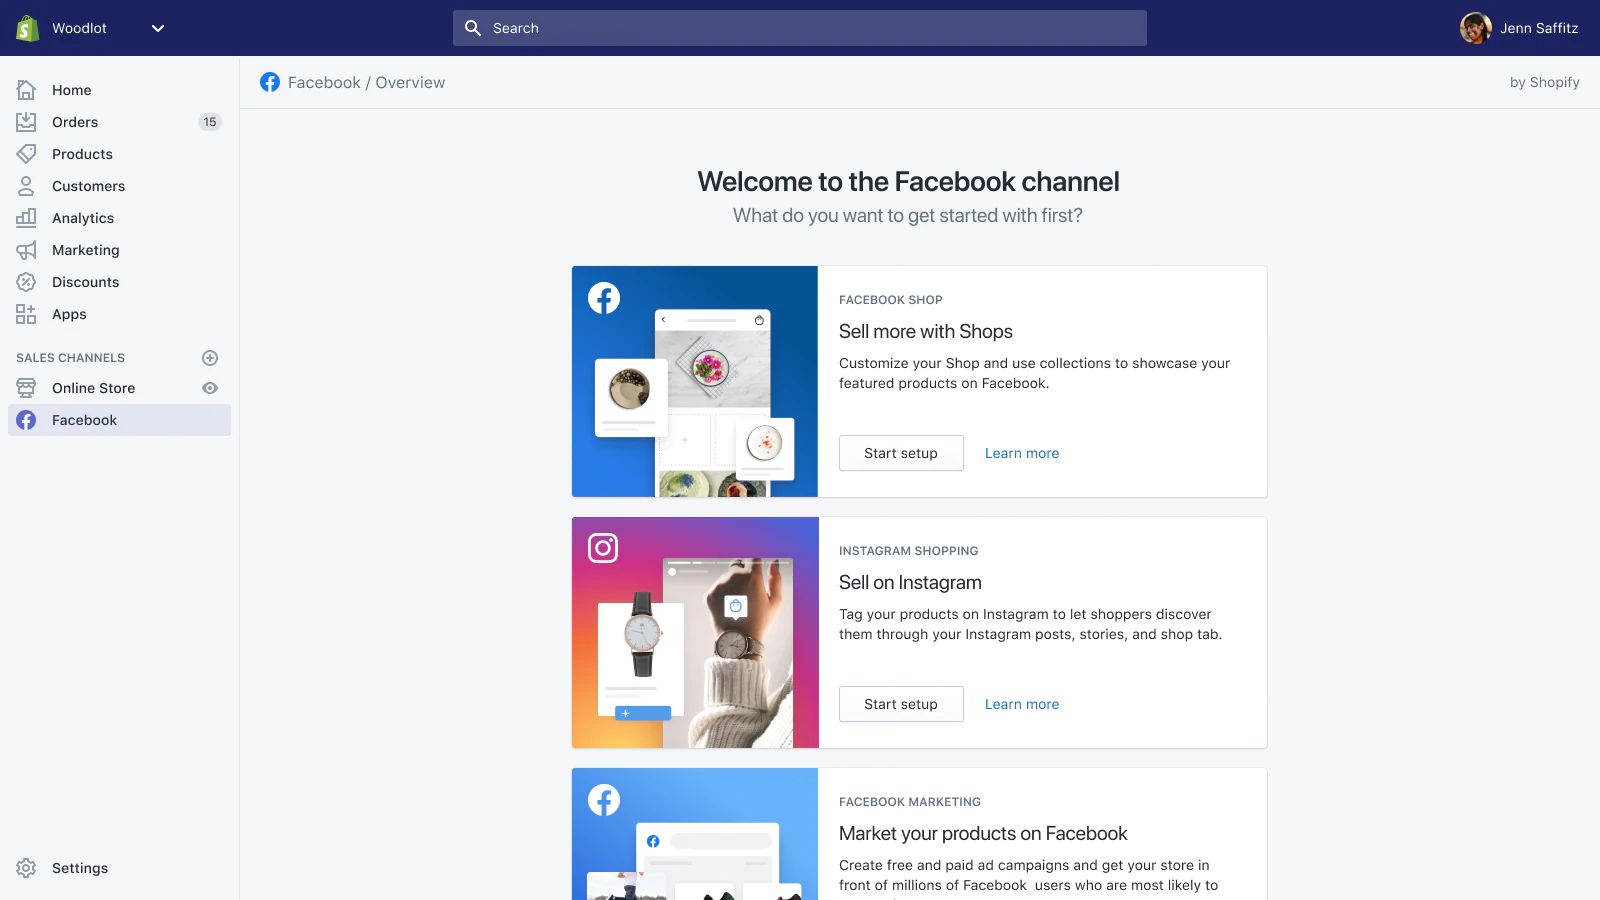 A screenshot of the Facebook channel by Shopify landing page within Facebook